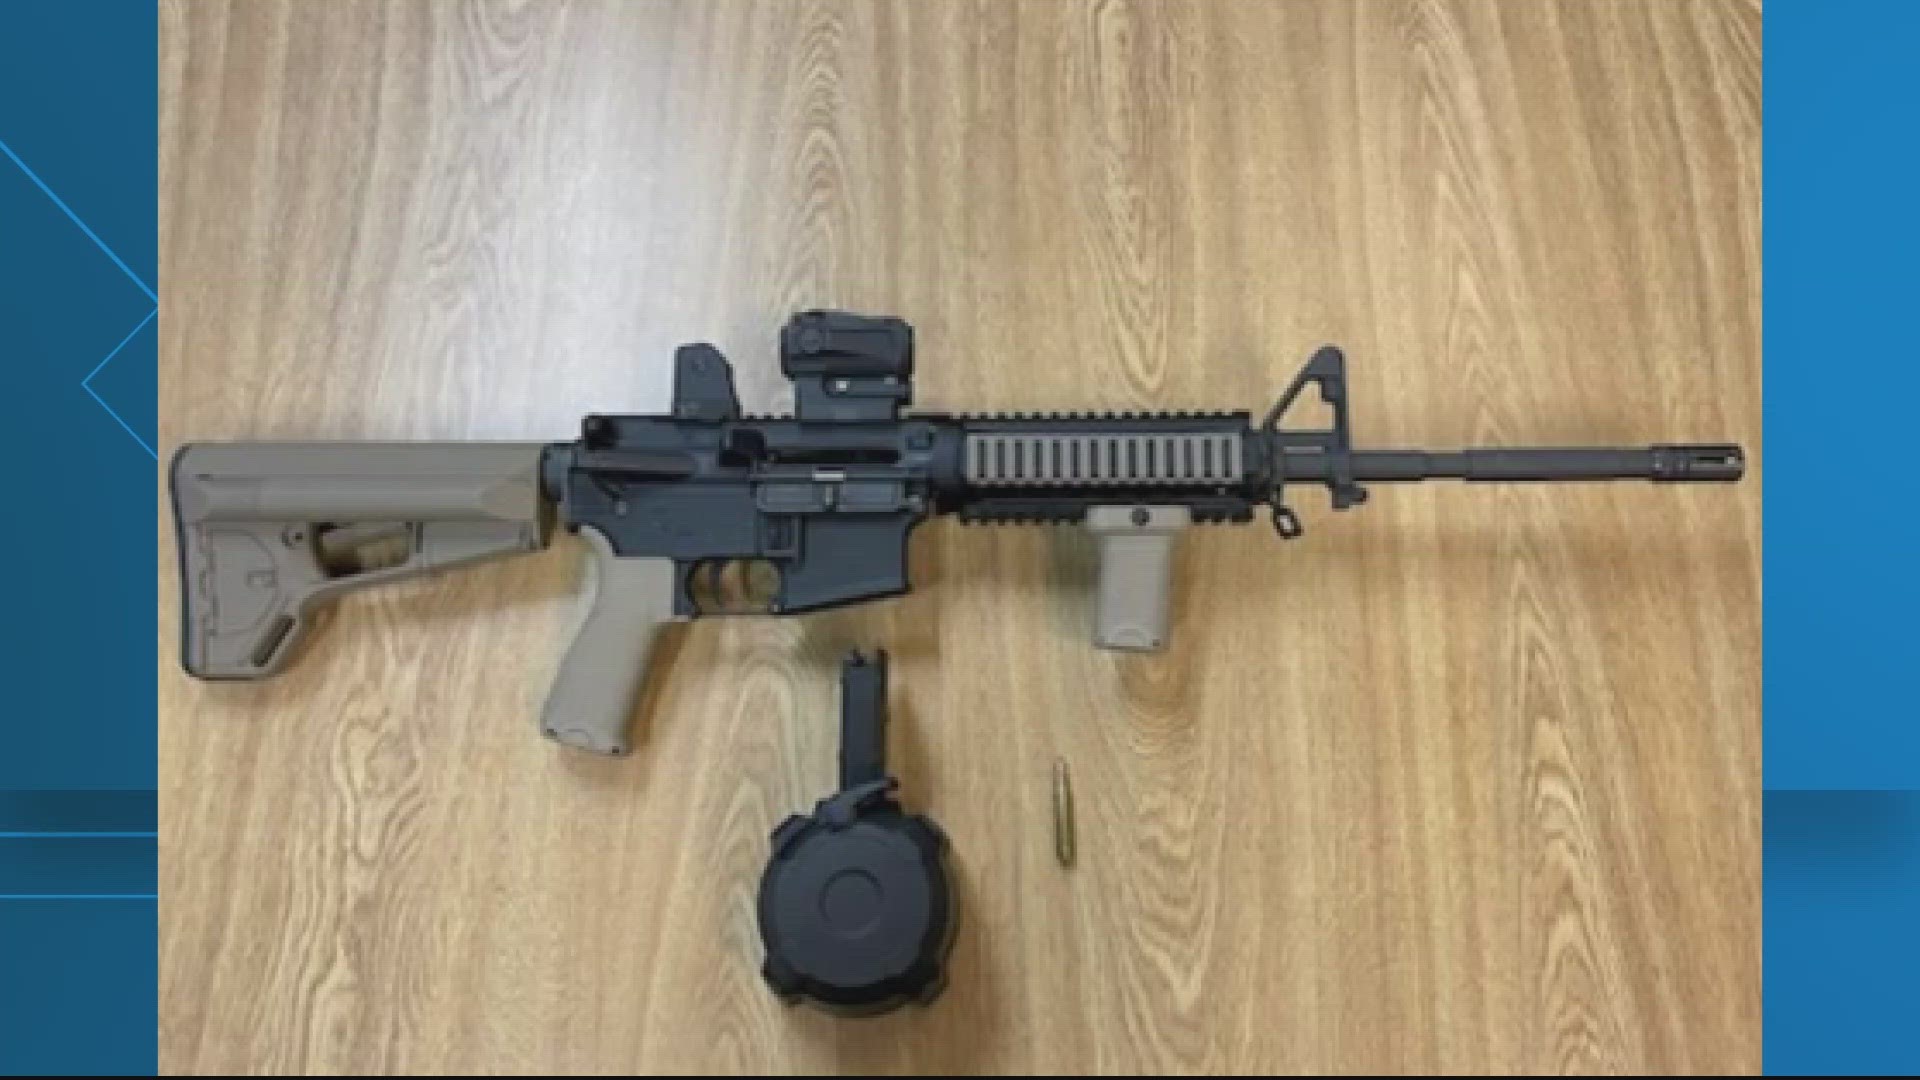 In Montgomery County -- police find meth and a stolen semi-automatic rifle during a traffic stop.
Police say the rifle was hidden in a gym bag.